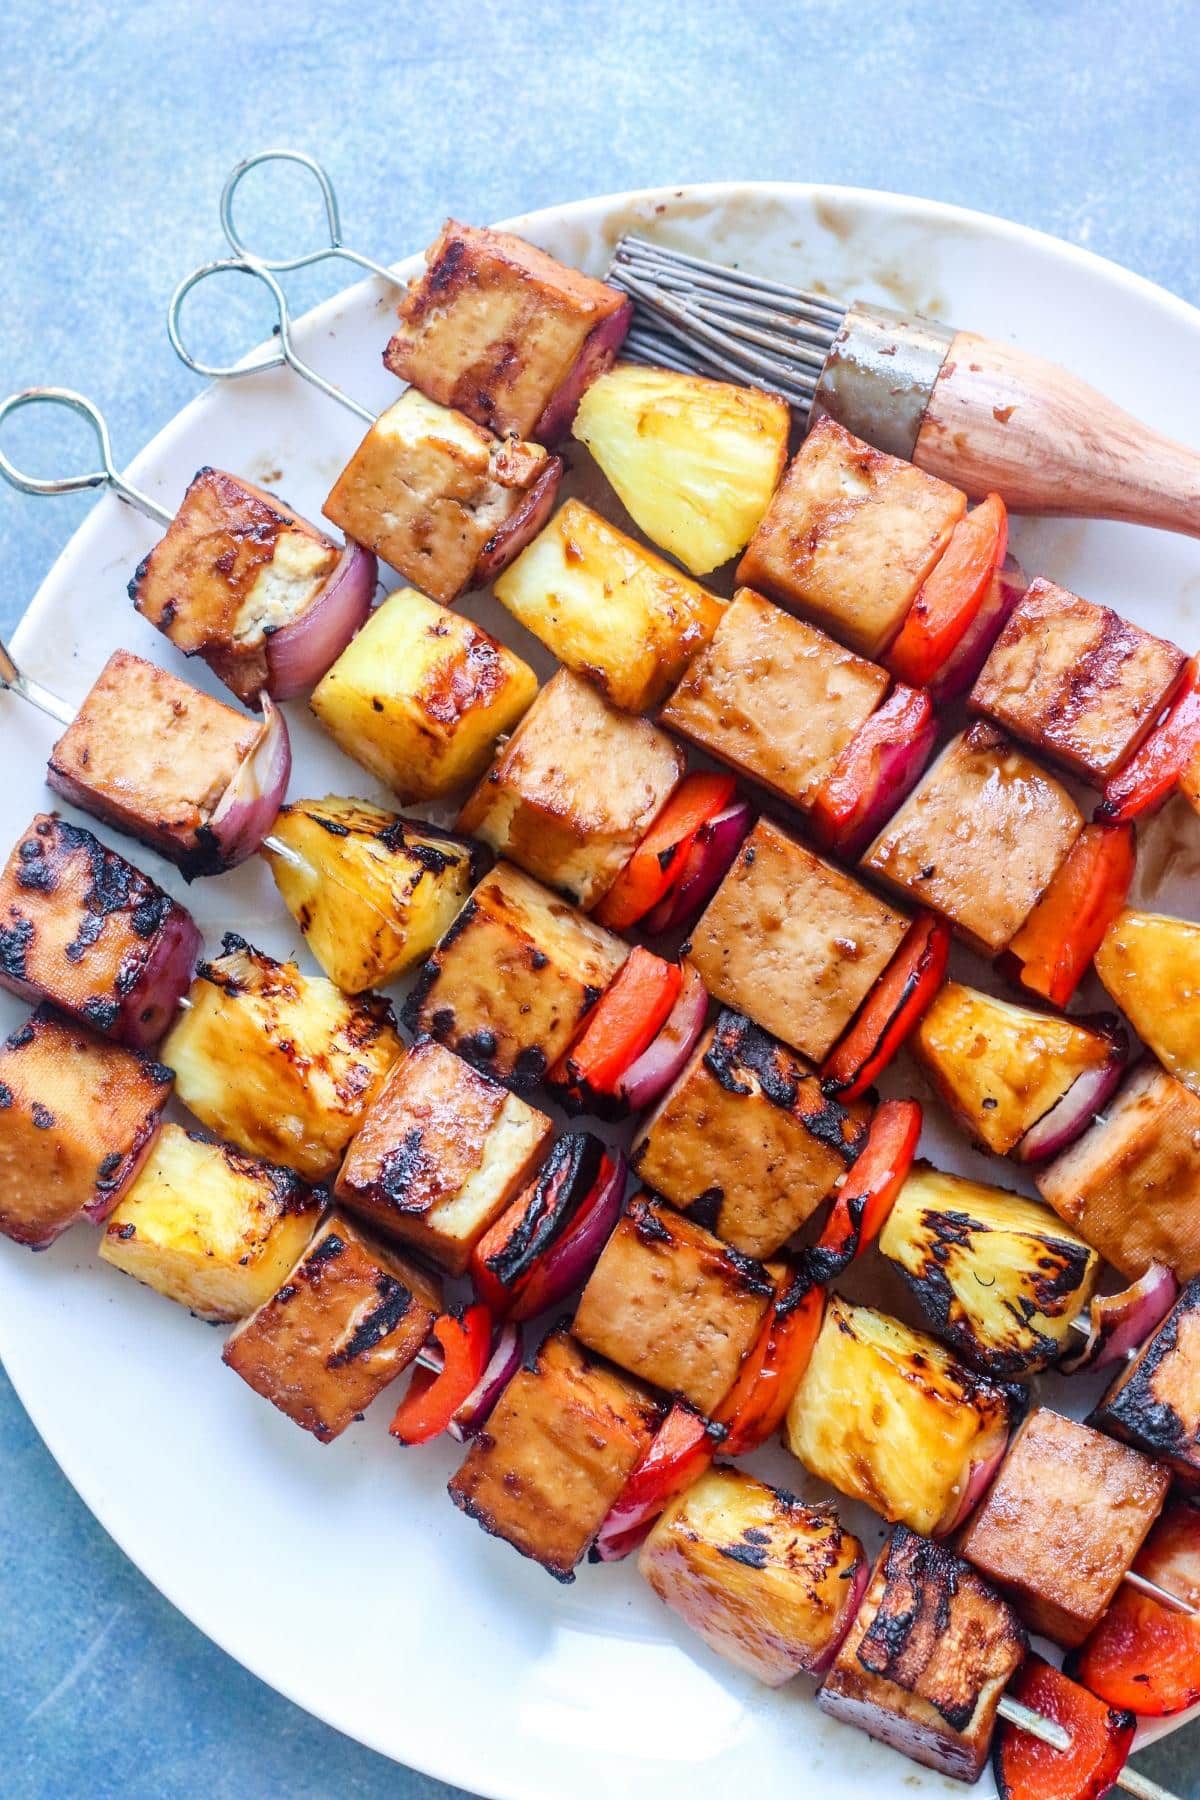 Plate of grilled tofu skewers with silicone basting brush.